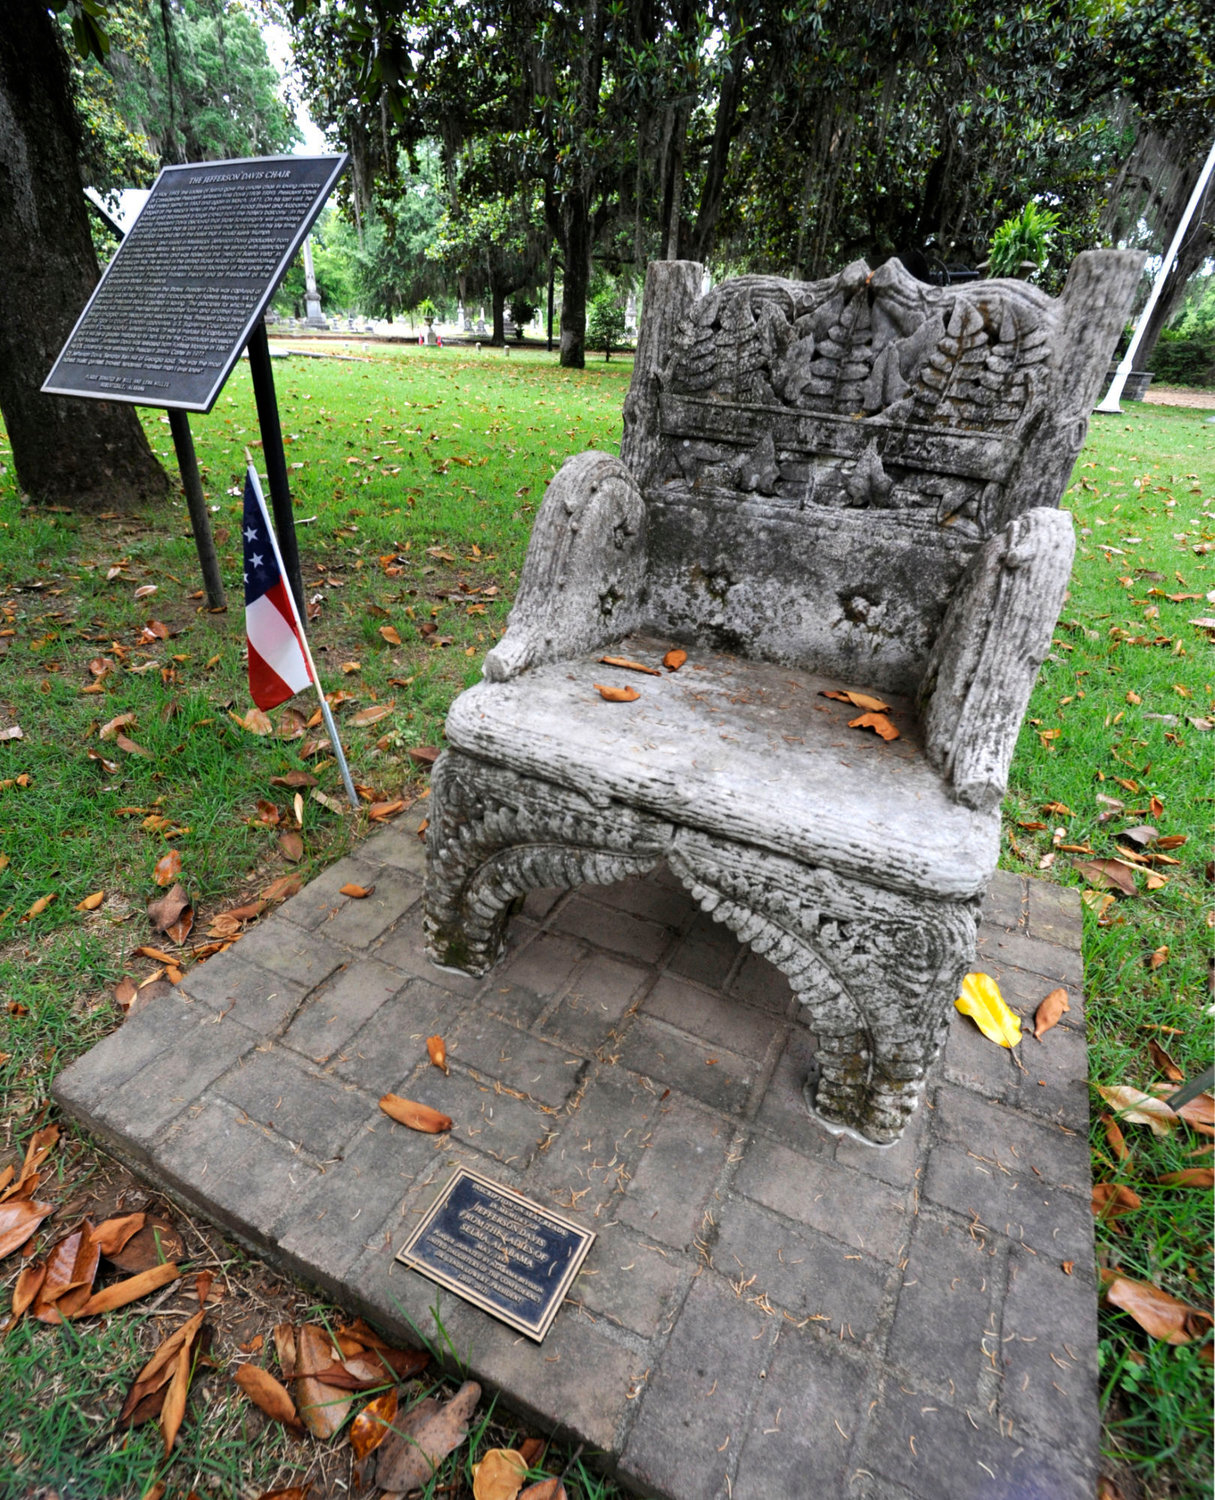 A monument to Confederate President Jefferson Davis, that was previously stolen, is shown back at its regular site at a cemetery in Selma, Ala., on Wednesday. Three people were charged following the disappearance of the chair, which was recovered in New Orleans and is now glued down.